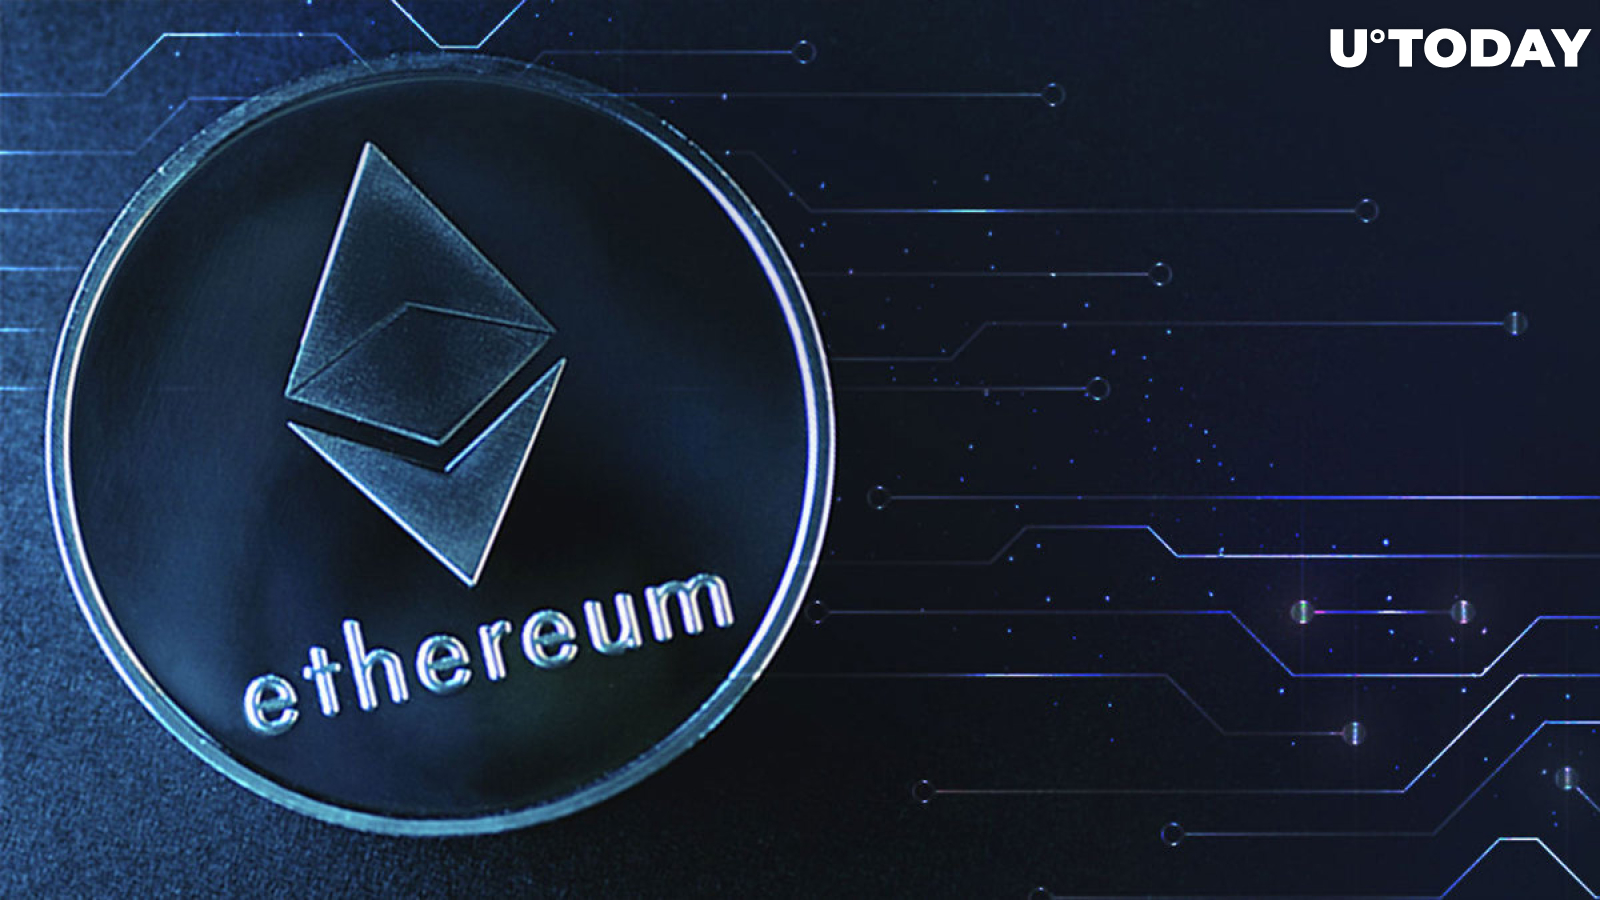 Ethereum: Majority of ETH Withdrawals Controlled by Two Entities